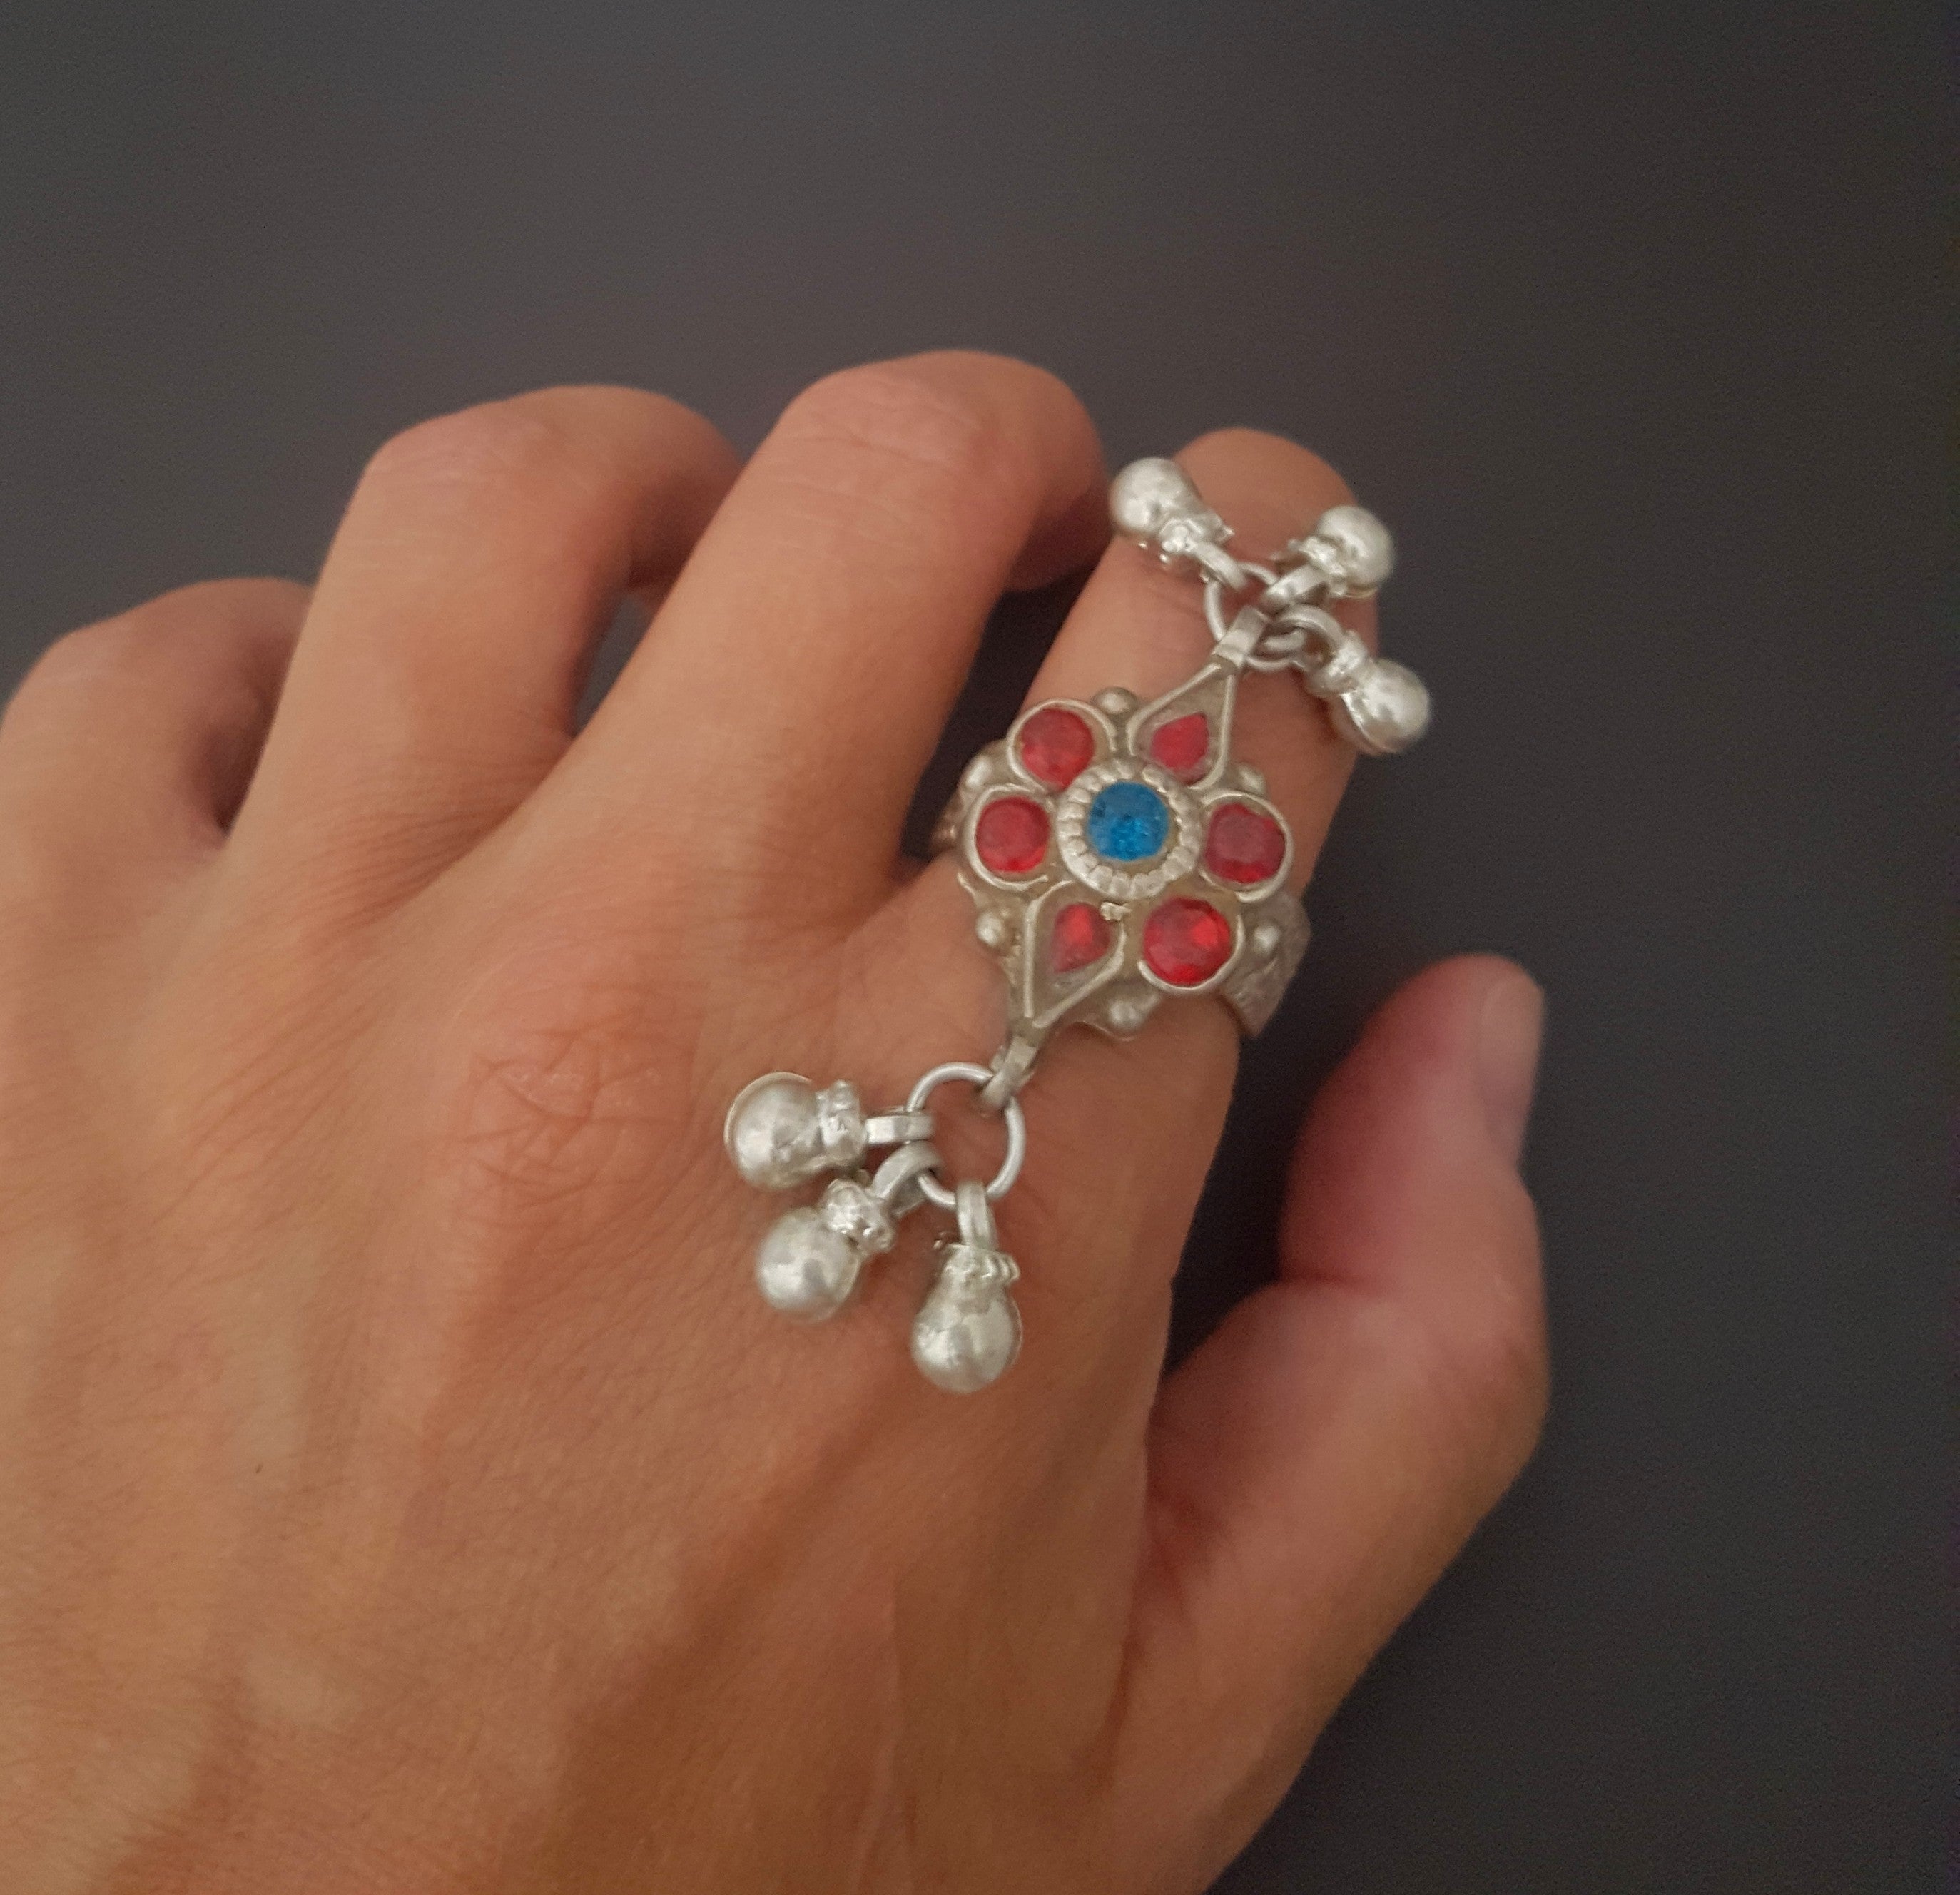 Rajasthani Flower Ring with Glass Stones and Bells - Size 9